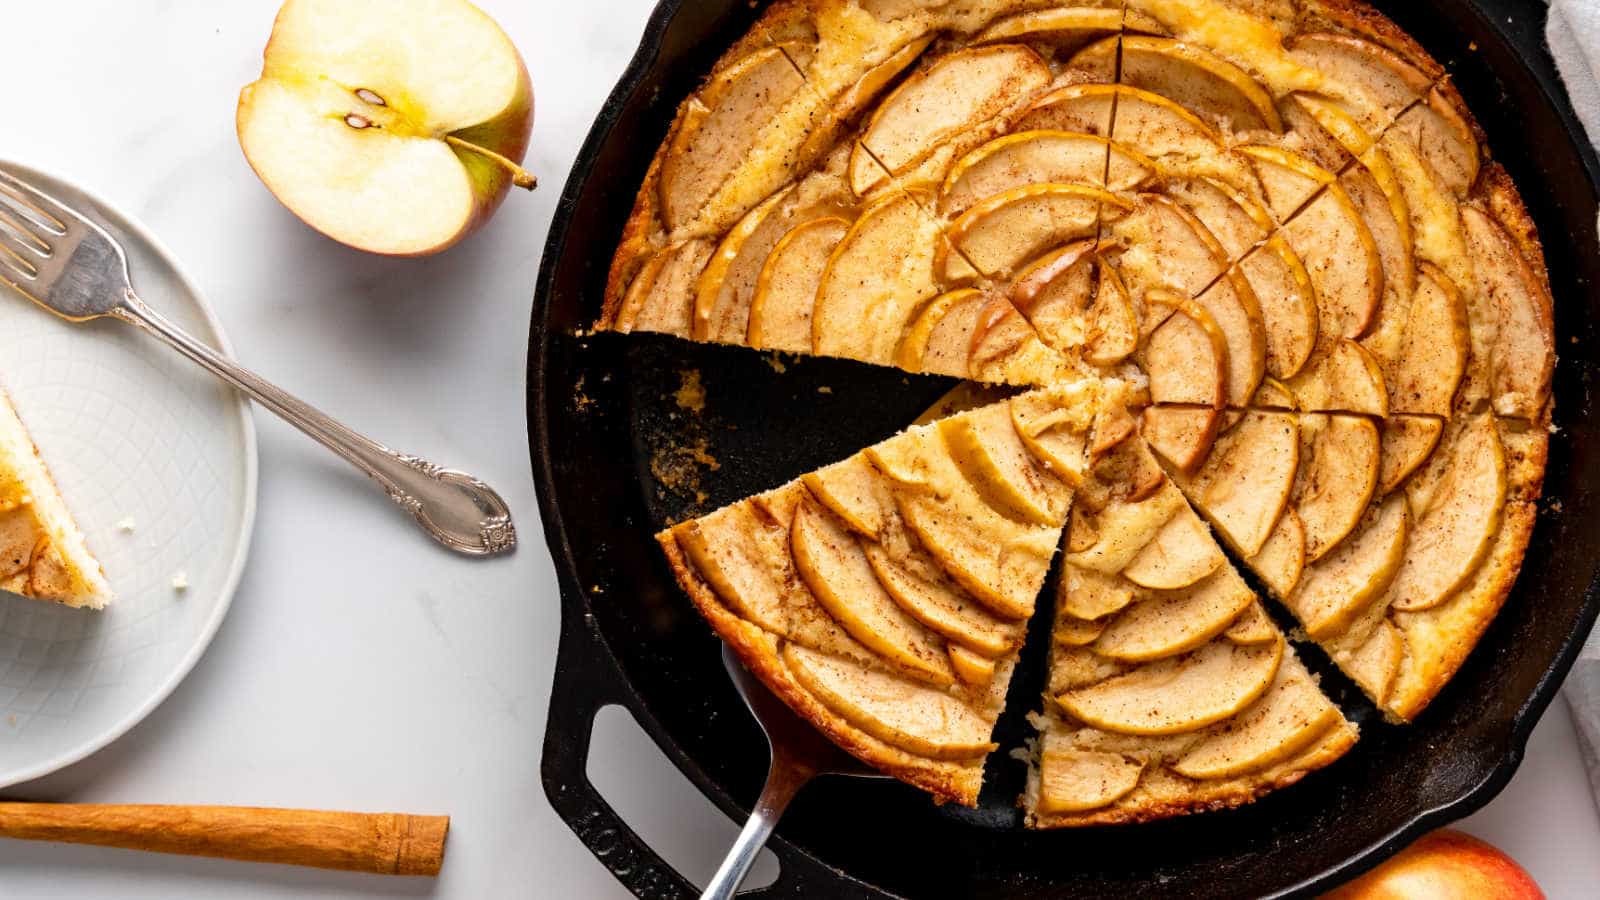 An apple cake baked in a cast iron skillet, cut into slices.